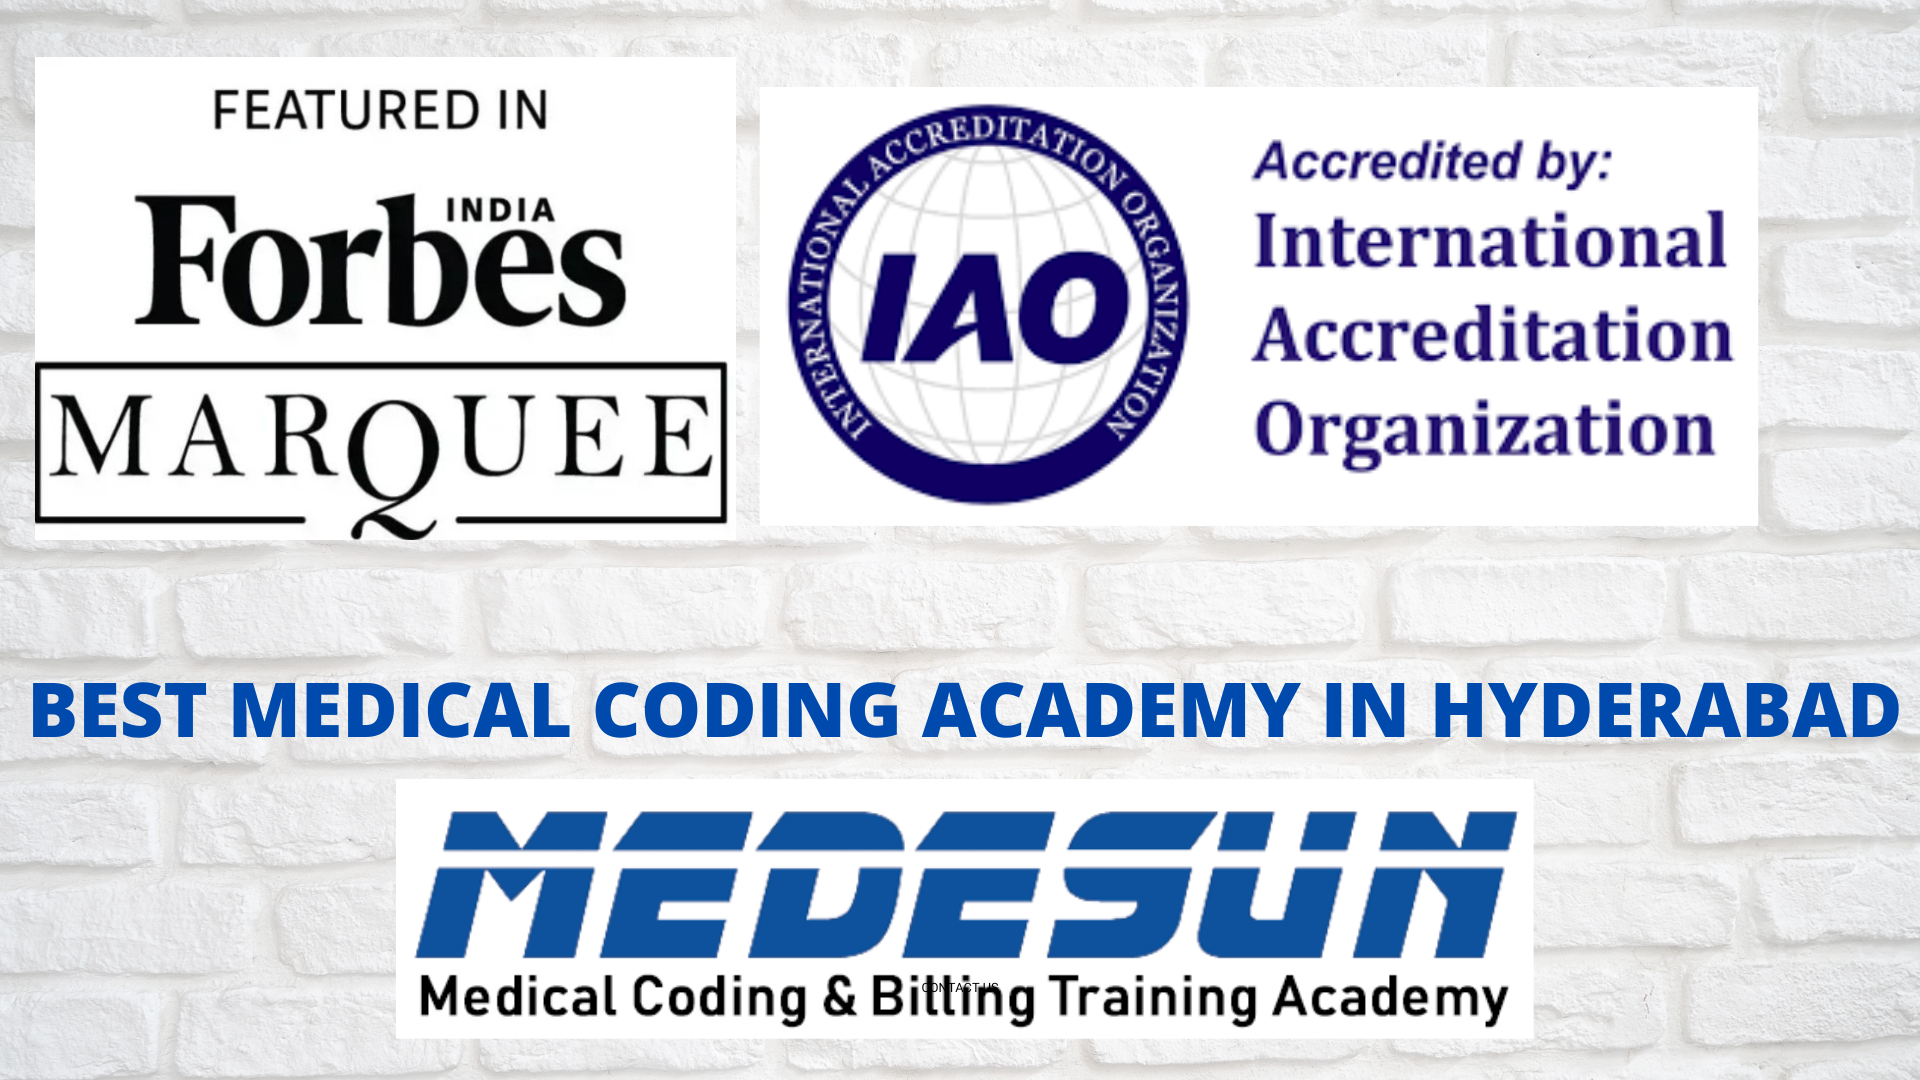 FEATURED IN

 

Accredited by:
For bés International
Accreditation
M A RO UE EJ Organization

BEST MEDICAL CODING ACADEMY IN HYDERABAD

ri LILI

Medical Coding & Bitting Training Academy